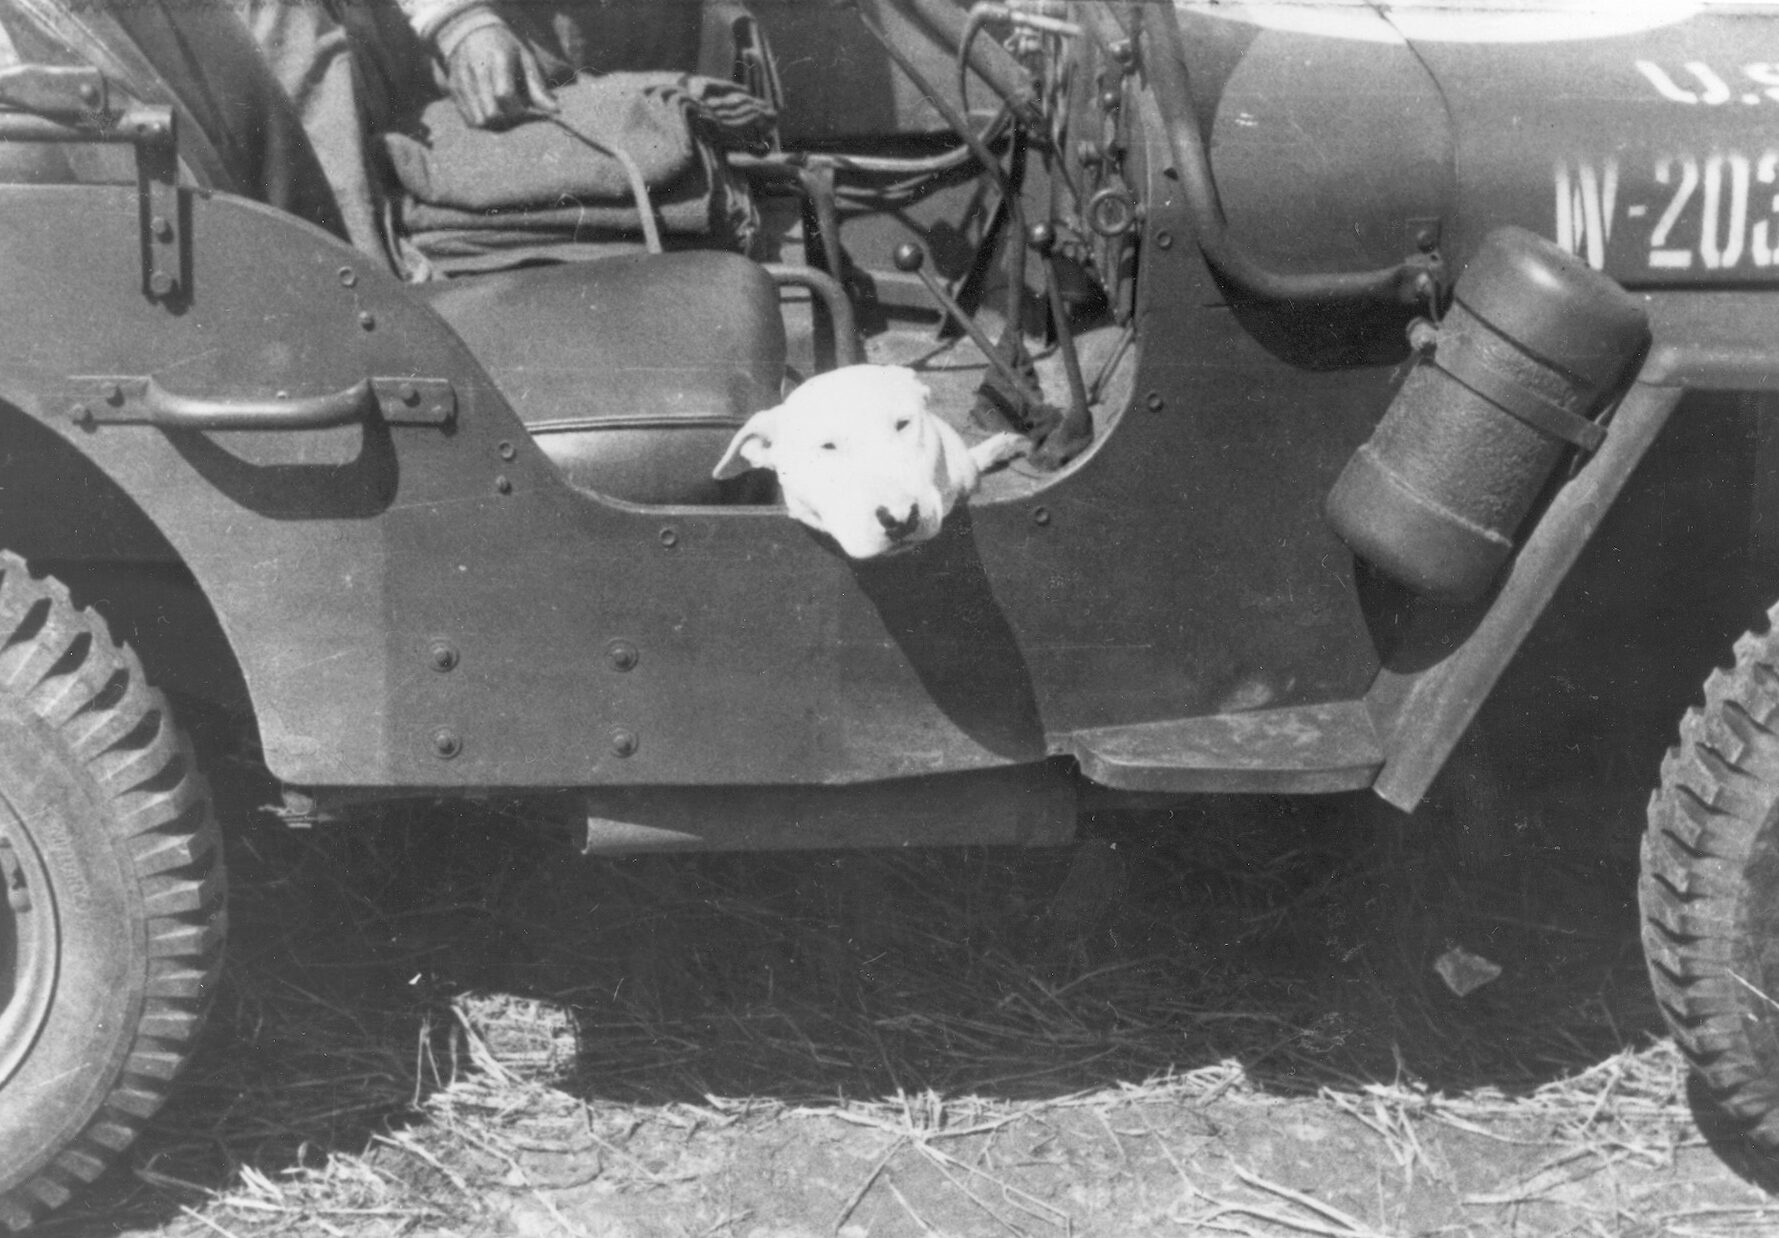 In January 1944, Patton took command of the U.S. Third Army in England. While training his new army and instilling it with his fighting spirit, he bought himself a white bull terrier he named Willie, who would become the focus of many a Patton picture.